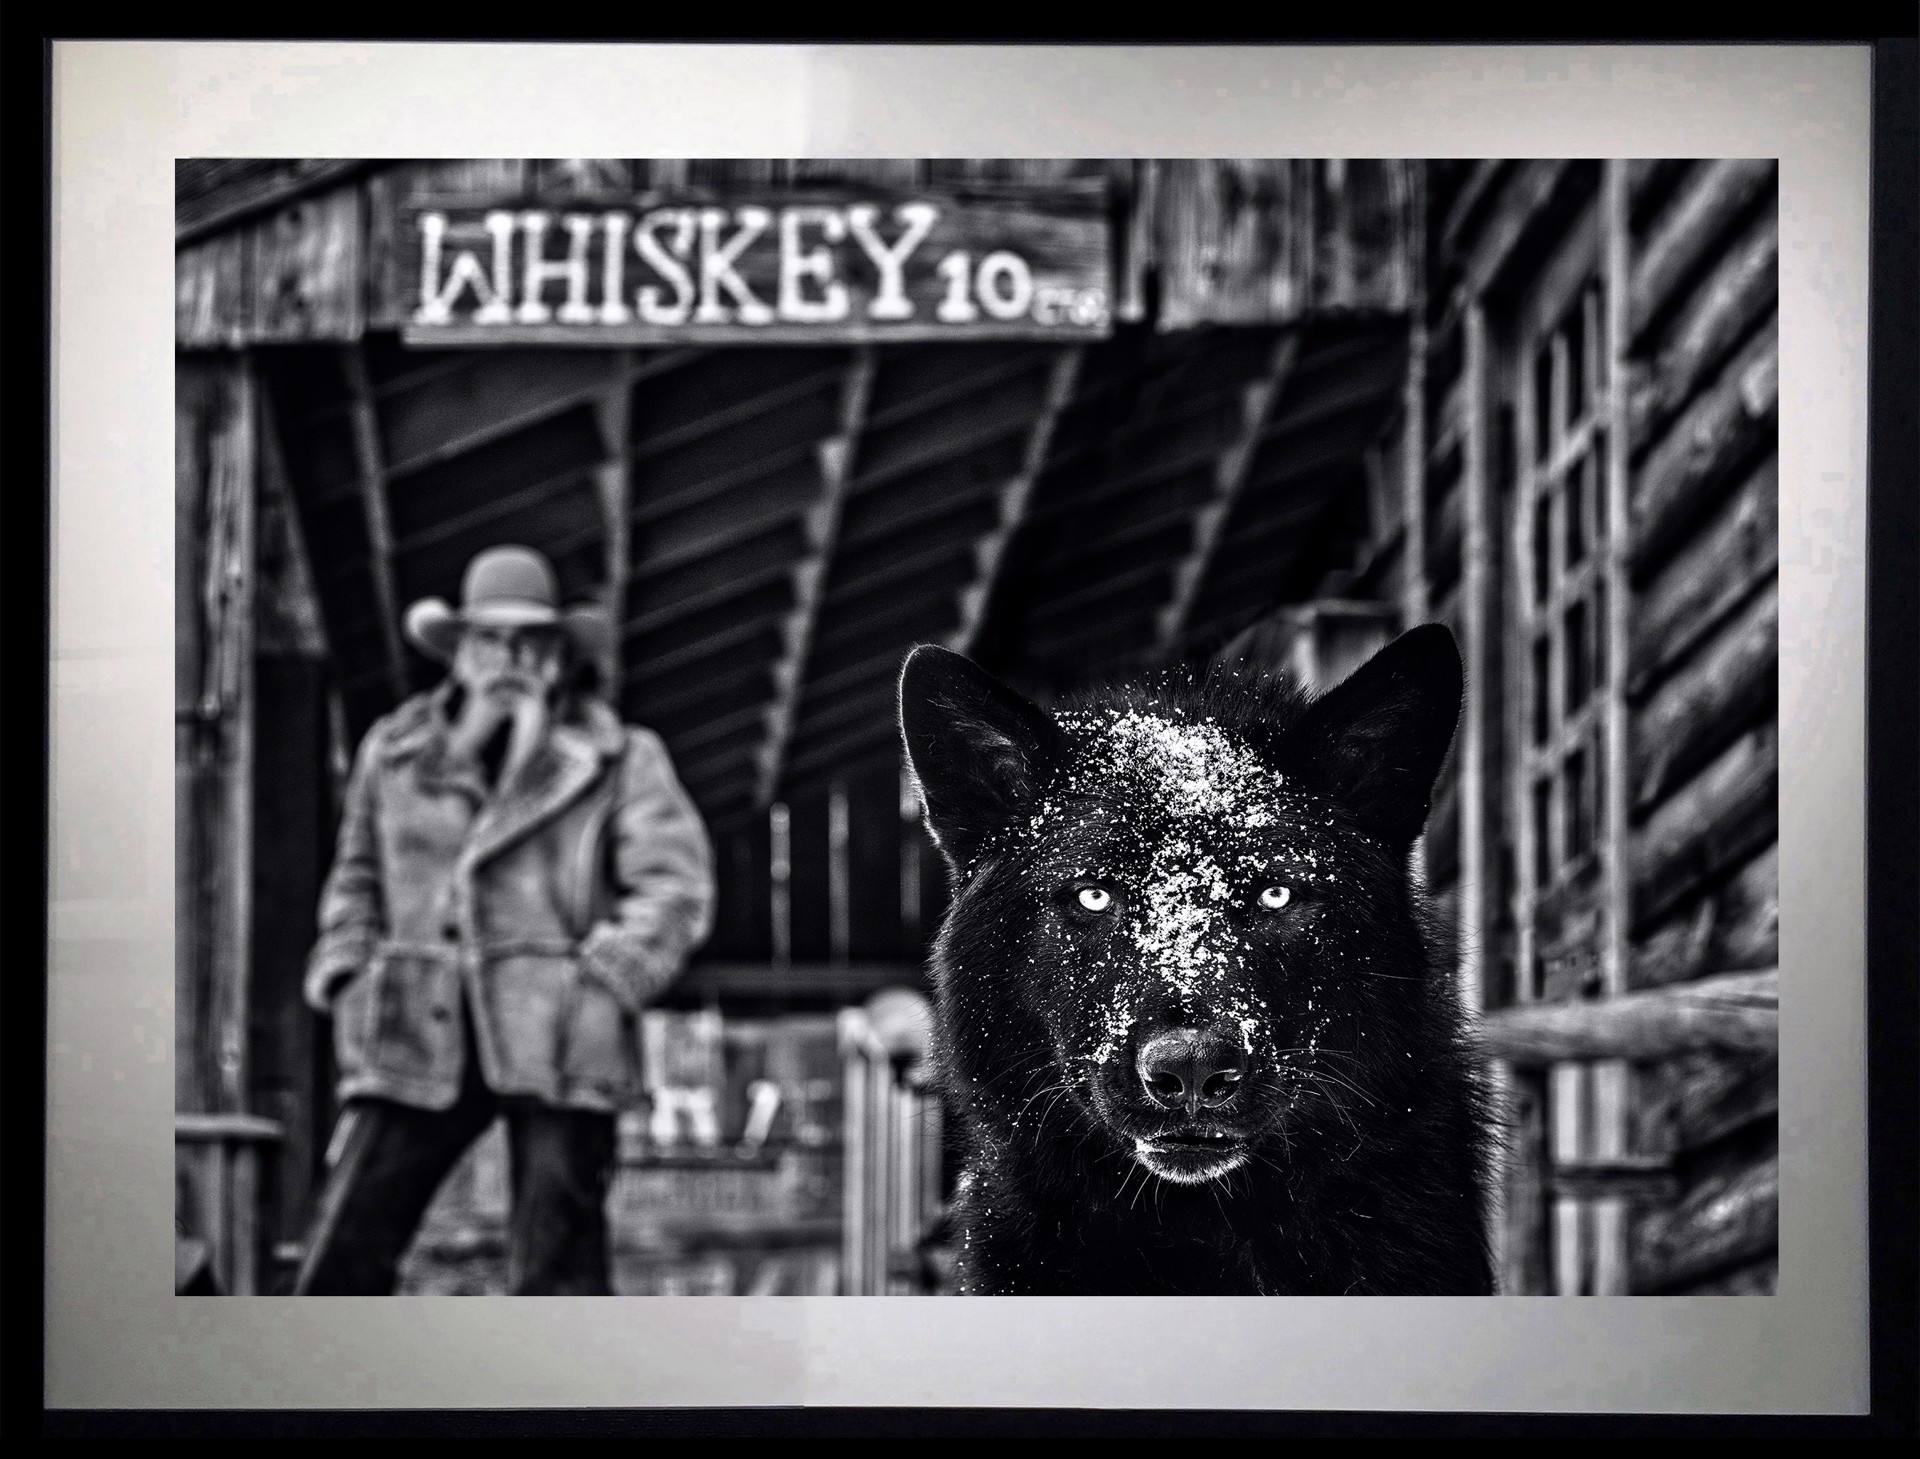 It Was The Whiskey Talking by David Yarrow